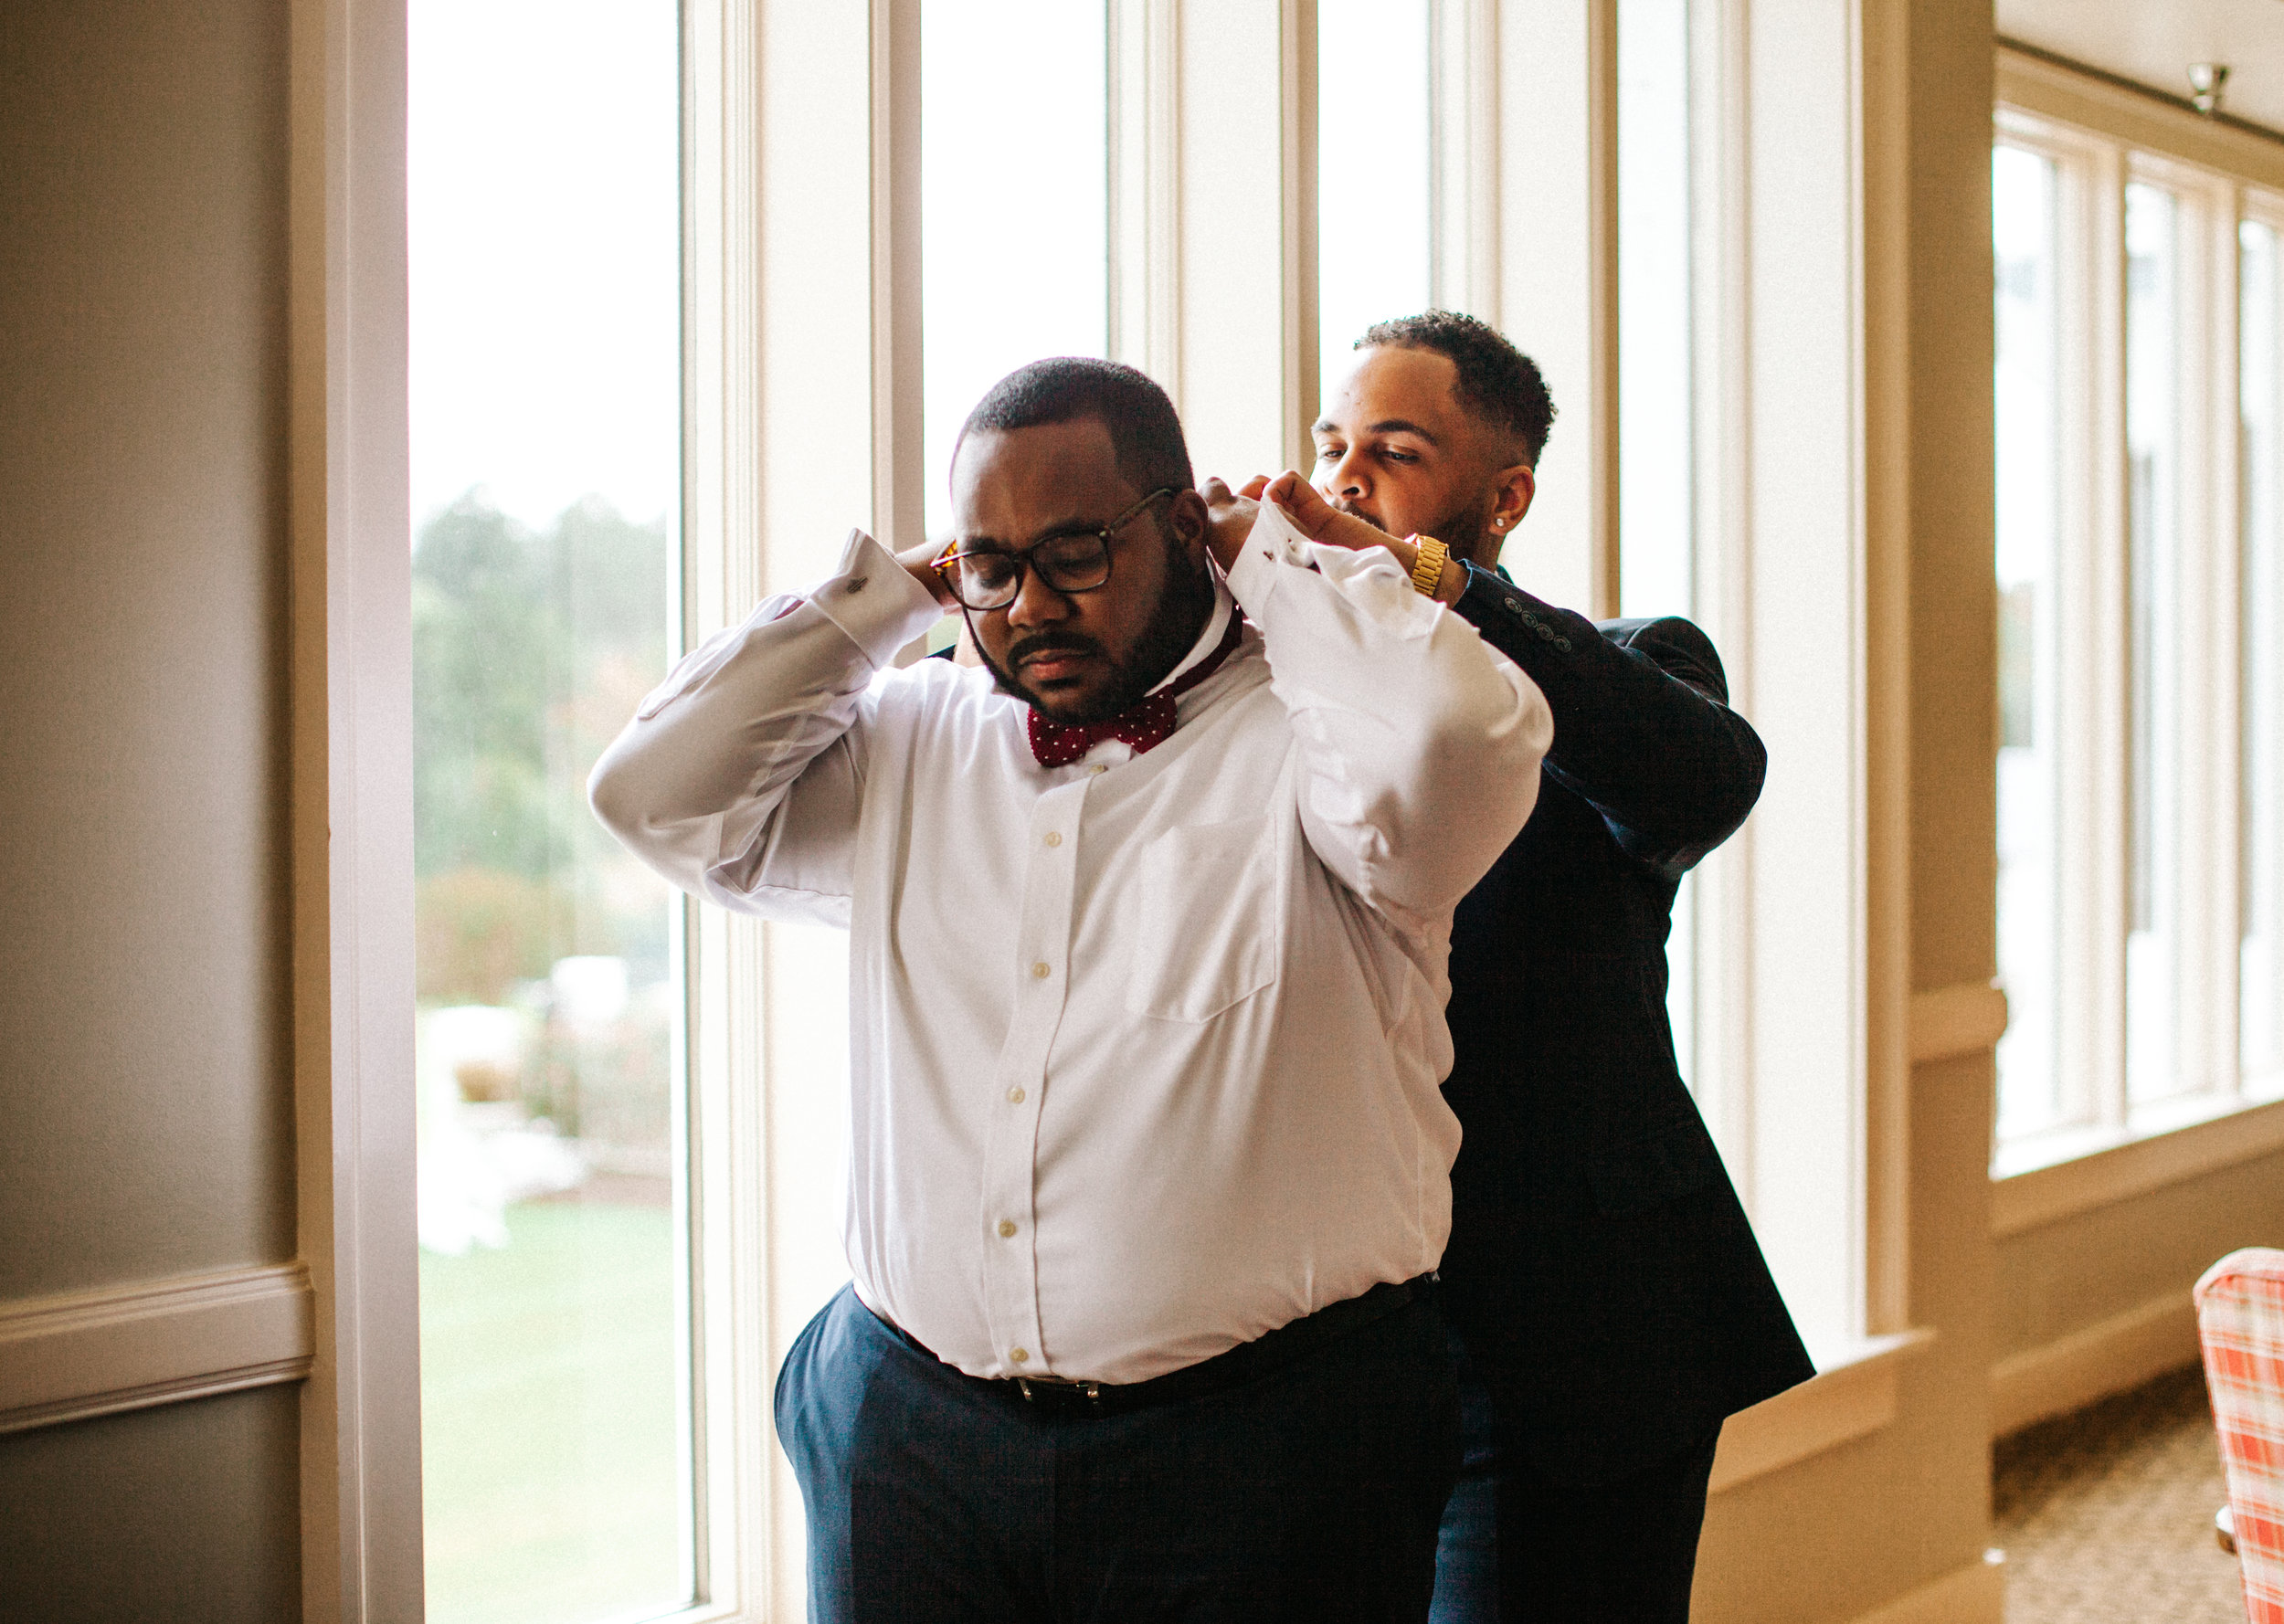  Hope Valley Country Club, Raleigh NC | Fall wedding | Groom’s getting ready photos | Marina Rey Photography 